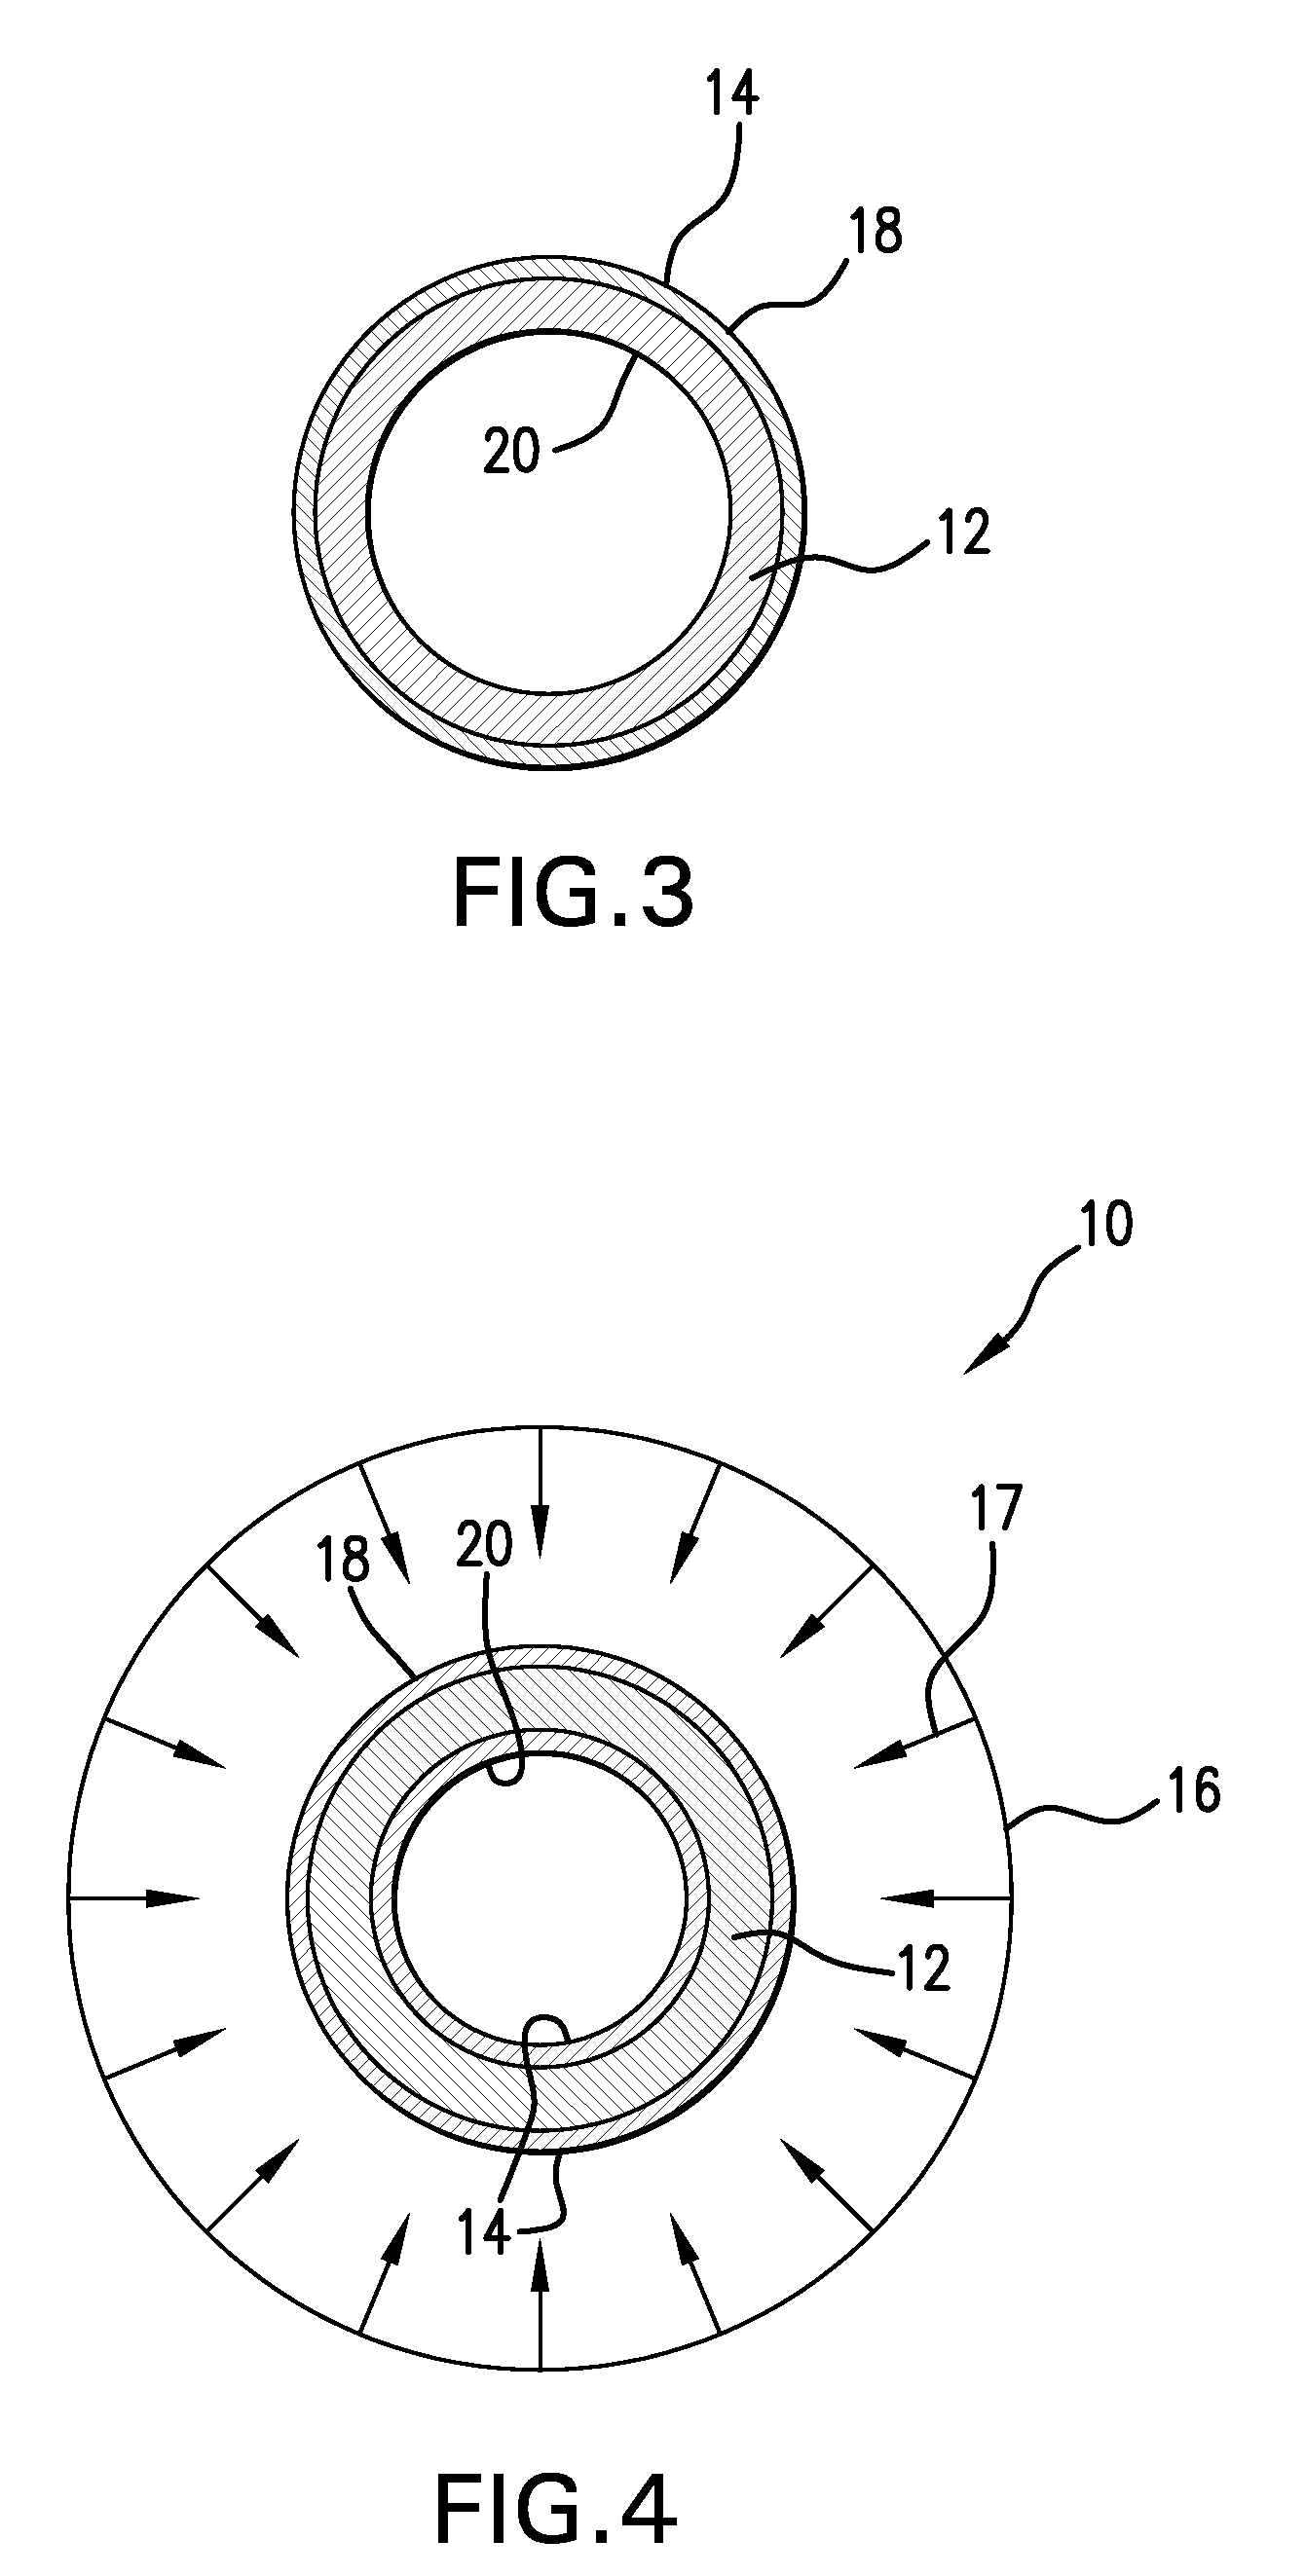 Photoresist coating to apply a coating to select areas of a medical device